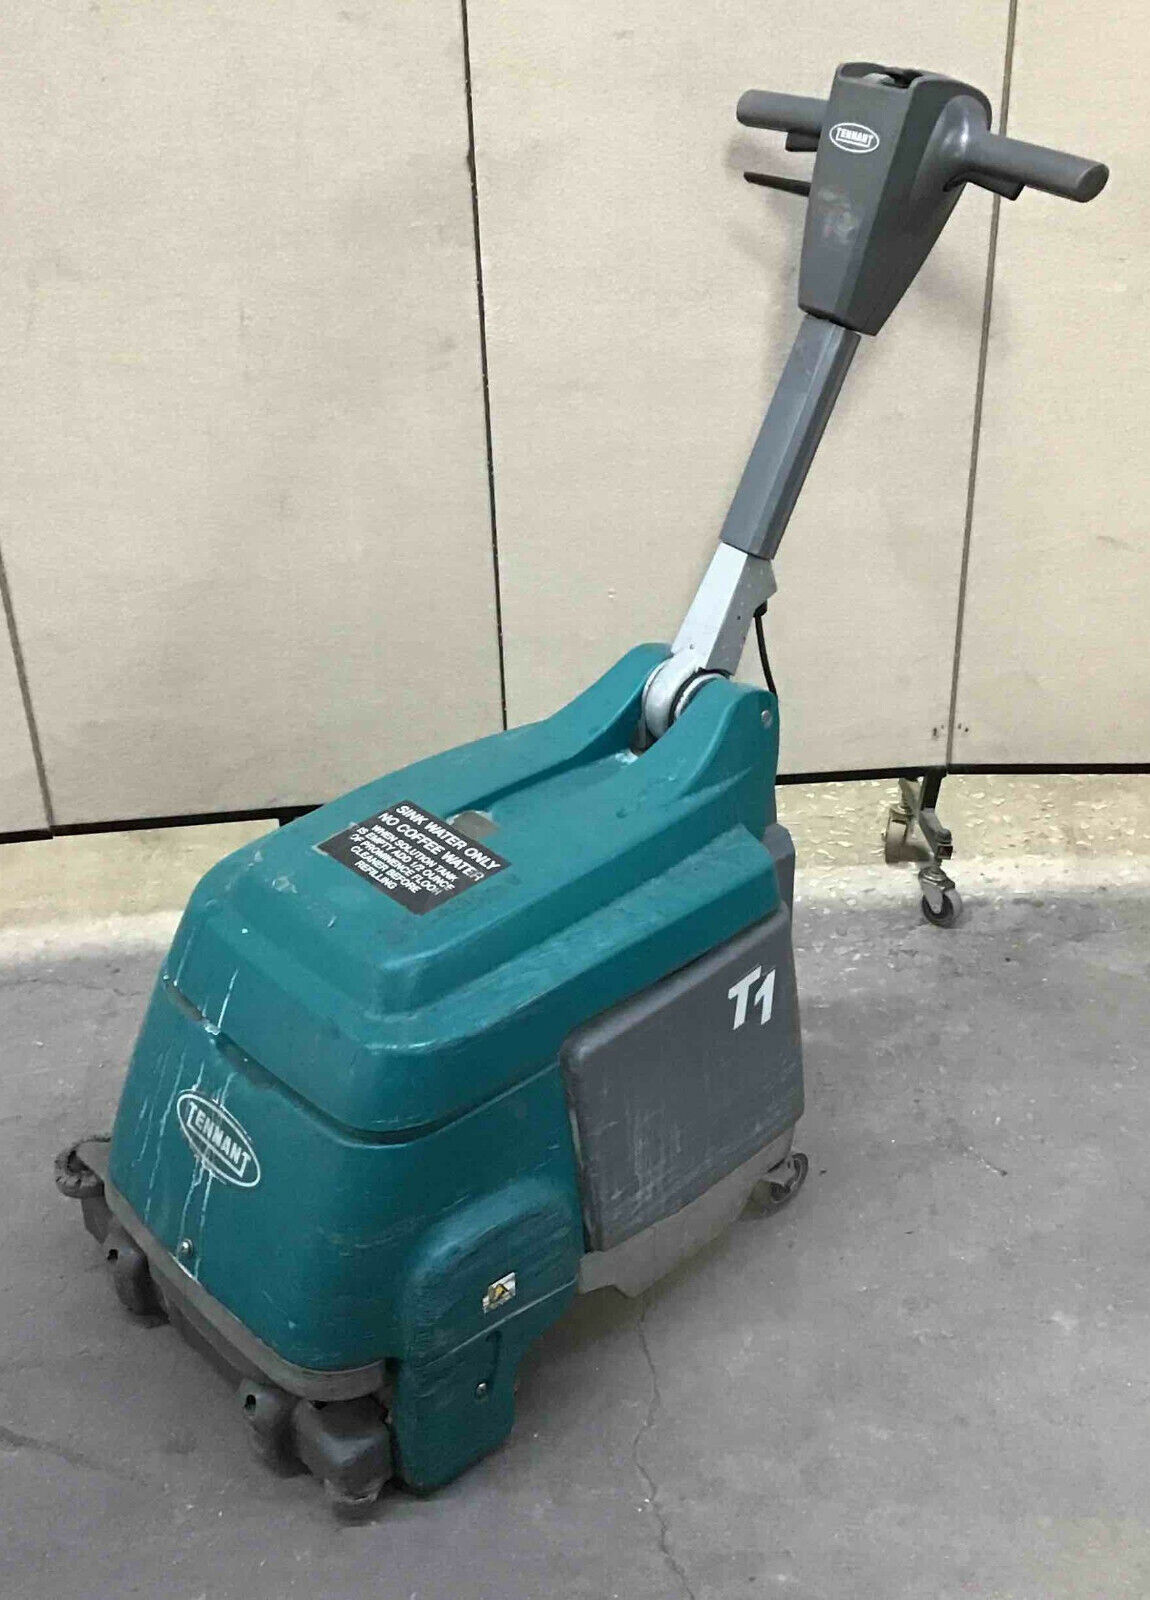 TENNANT T1 Lithium Ion BATTERY OPERATED FLOOR SCRUBBER - NO CHARGER 8665